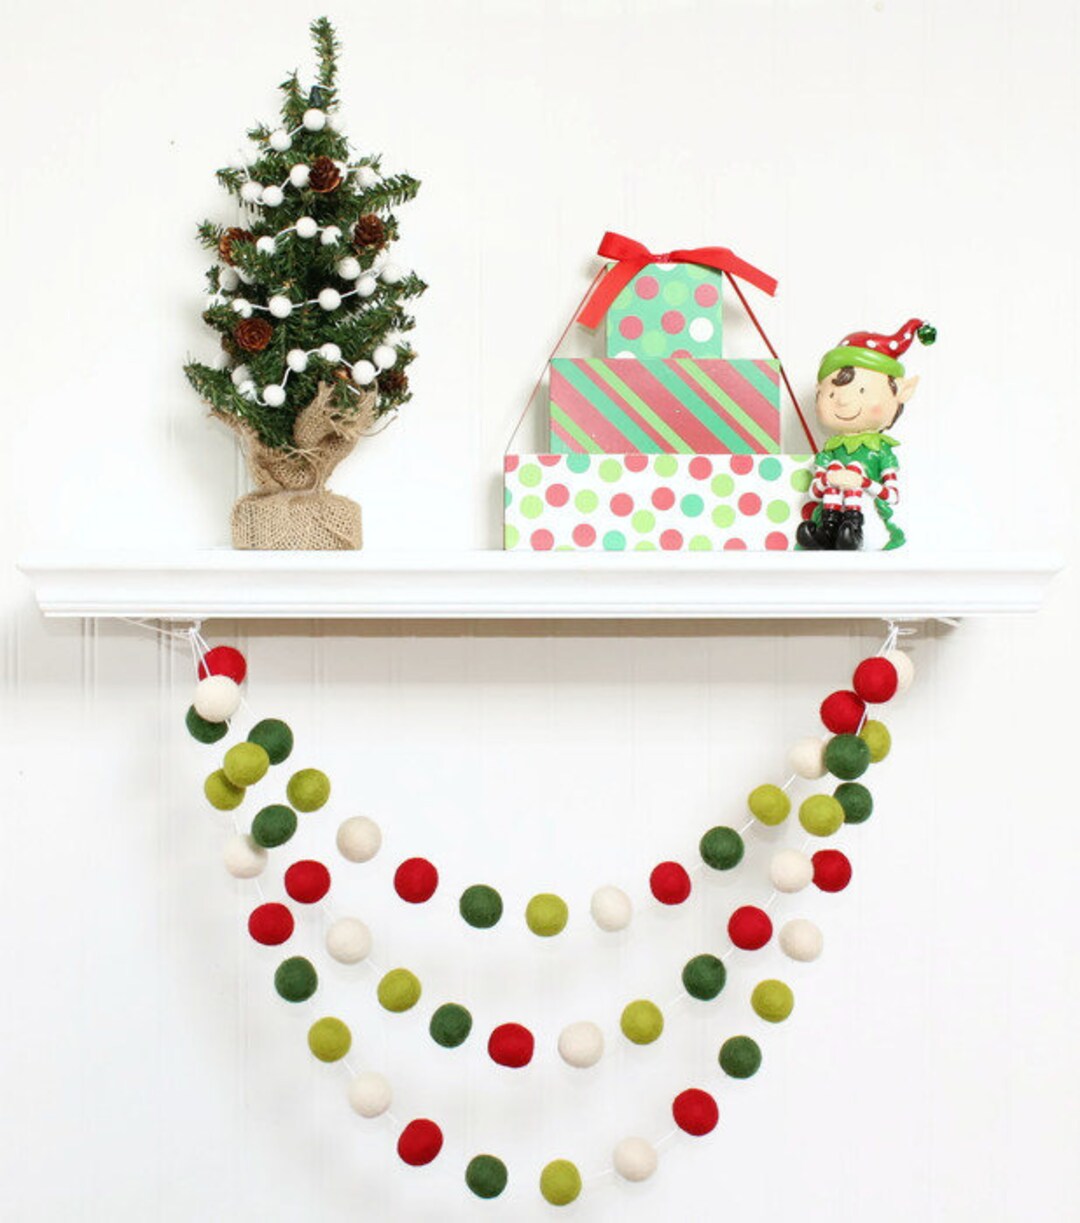 Farmhouse Christmas Pom Pom Garland, Red and Green Rustic Wood